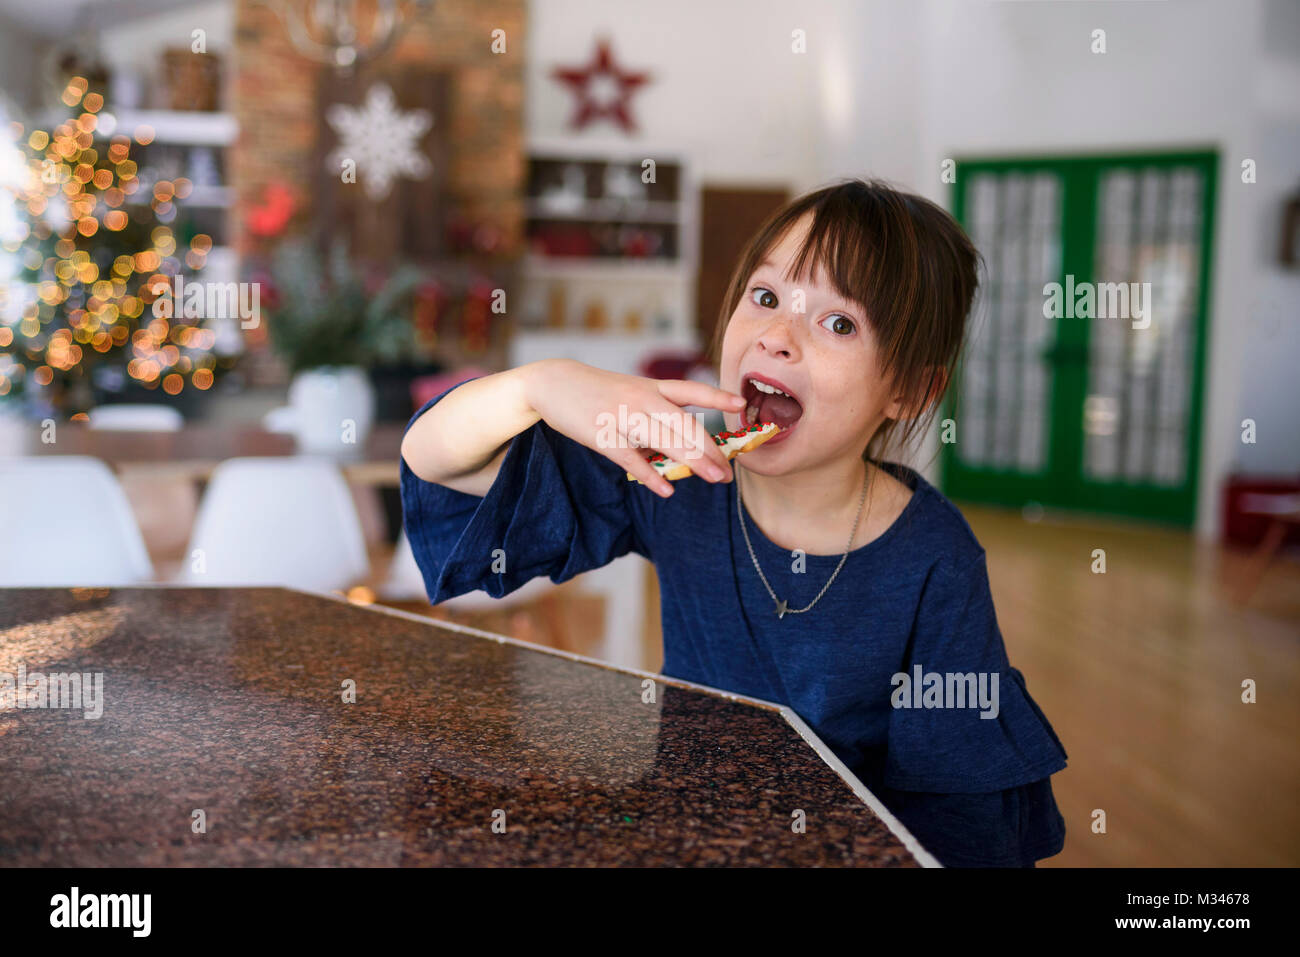 Girl standing in a kitchen eating a Christmas cookie Stock Photo